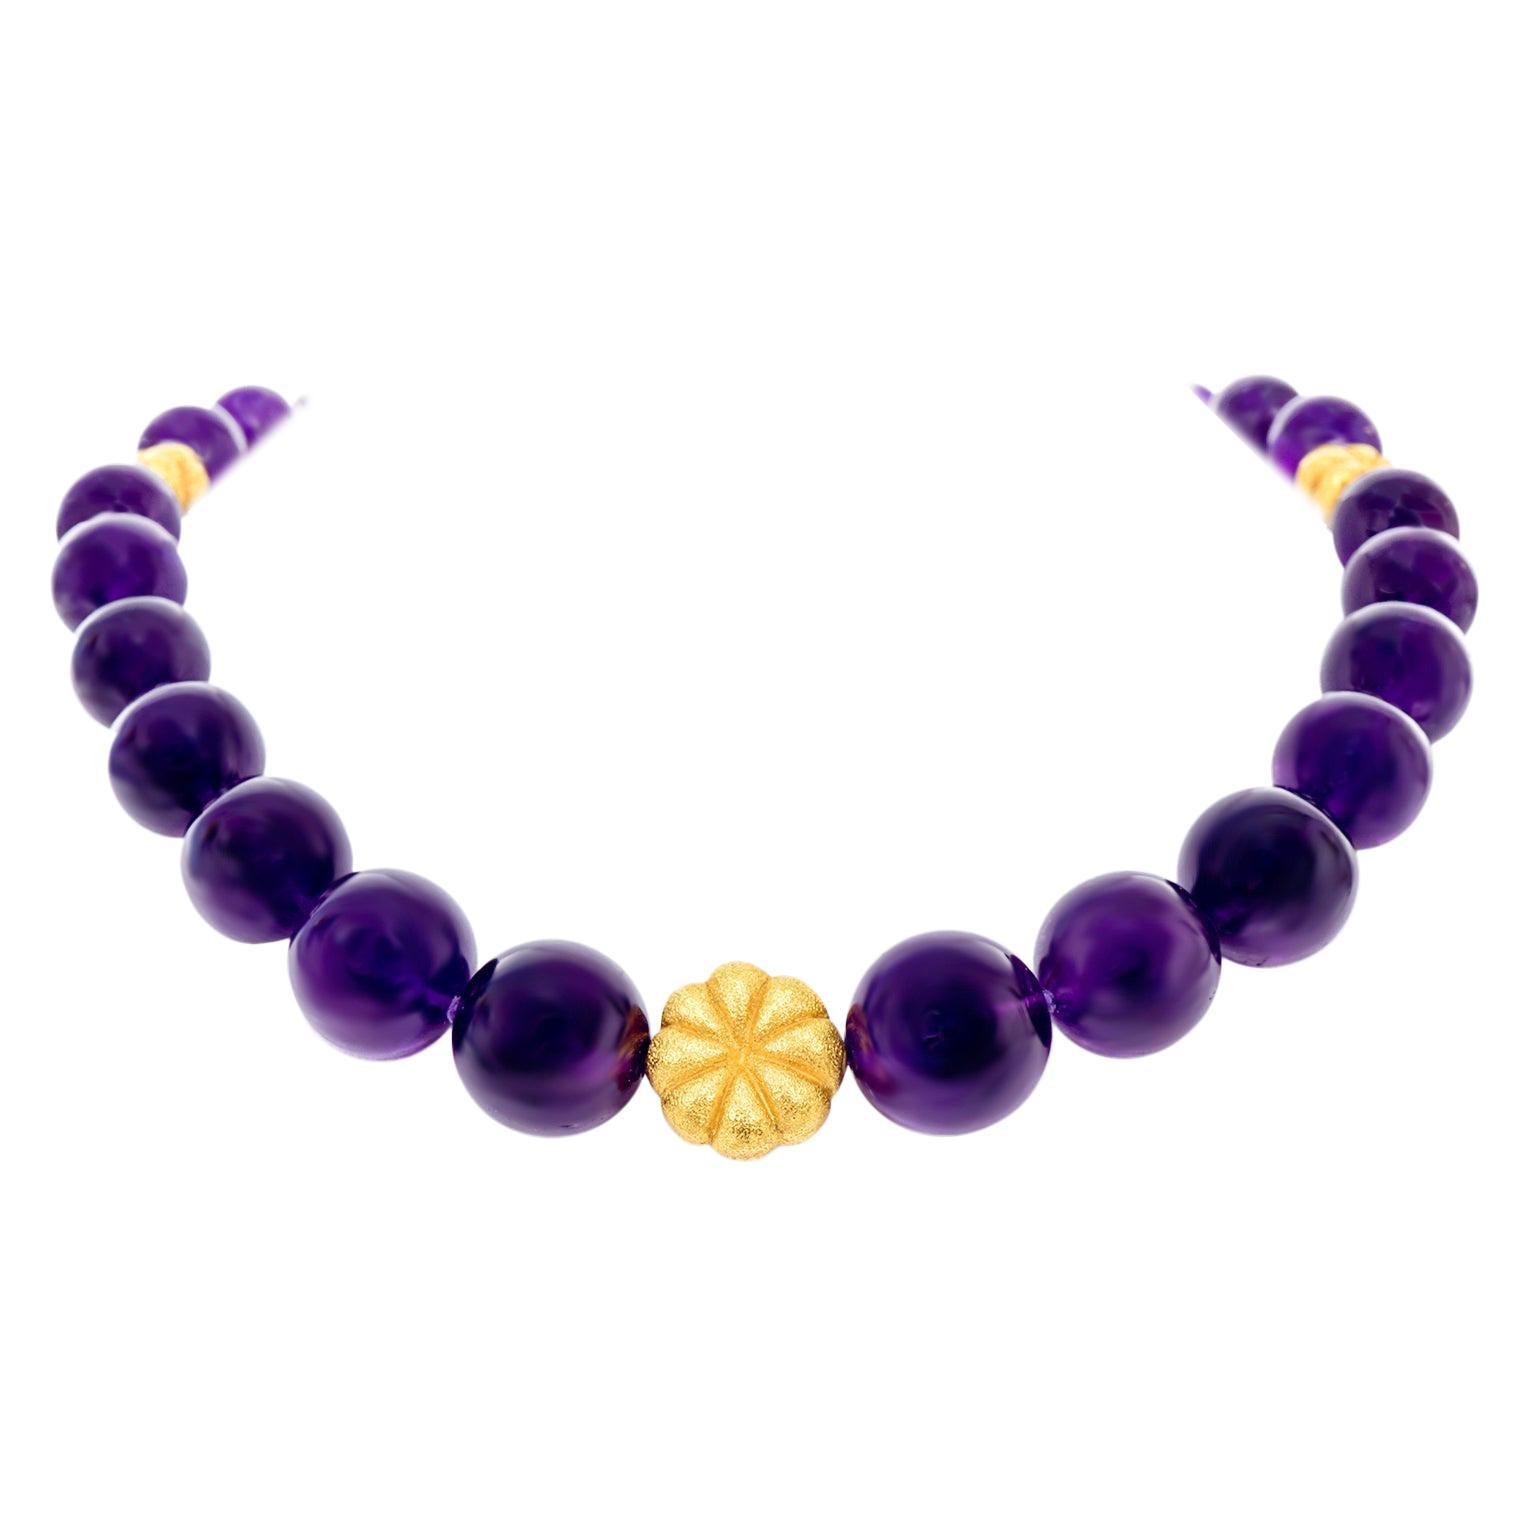 Amethyst and Gold Bead Necklace and Bracelet